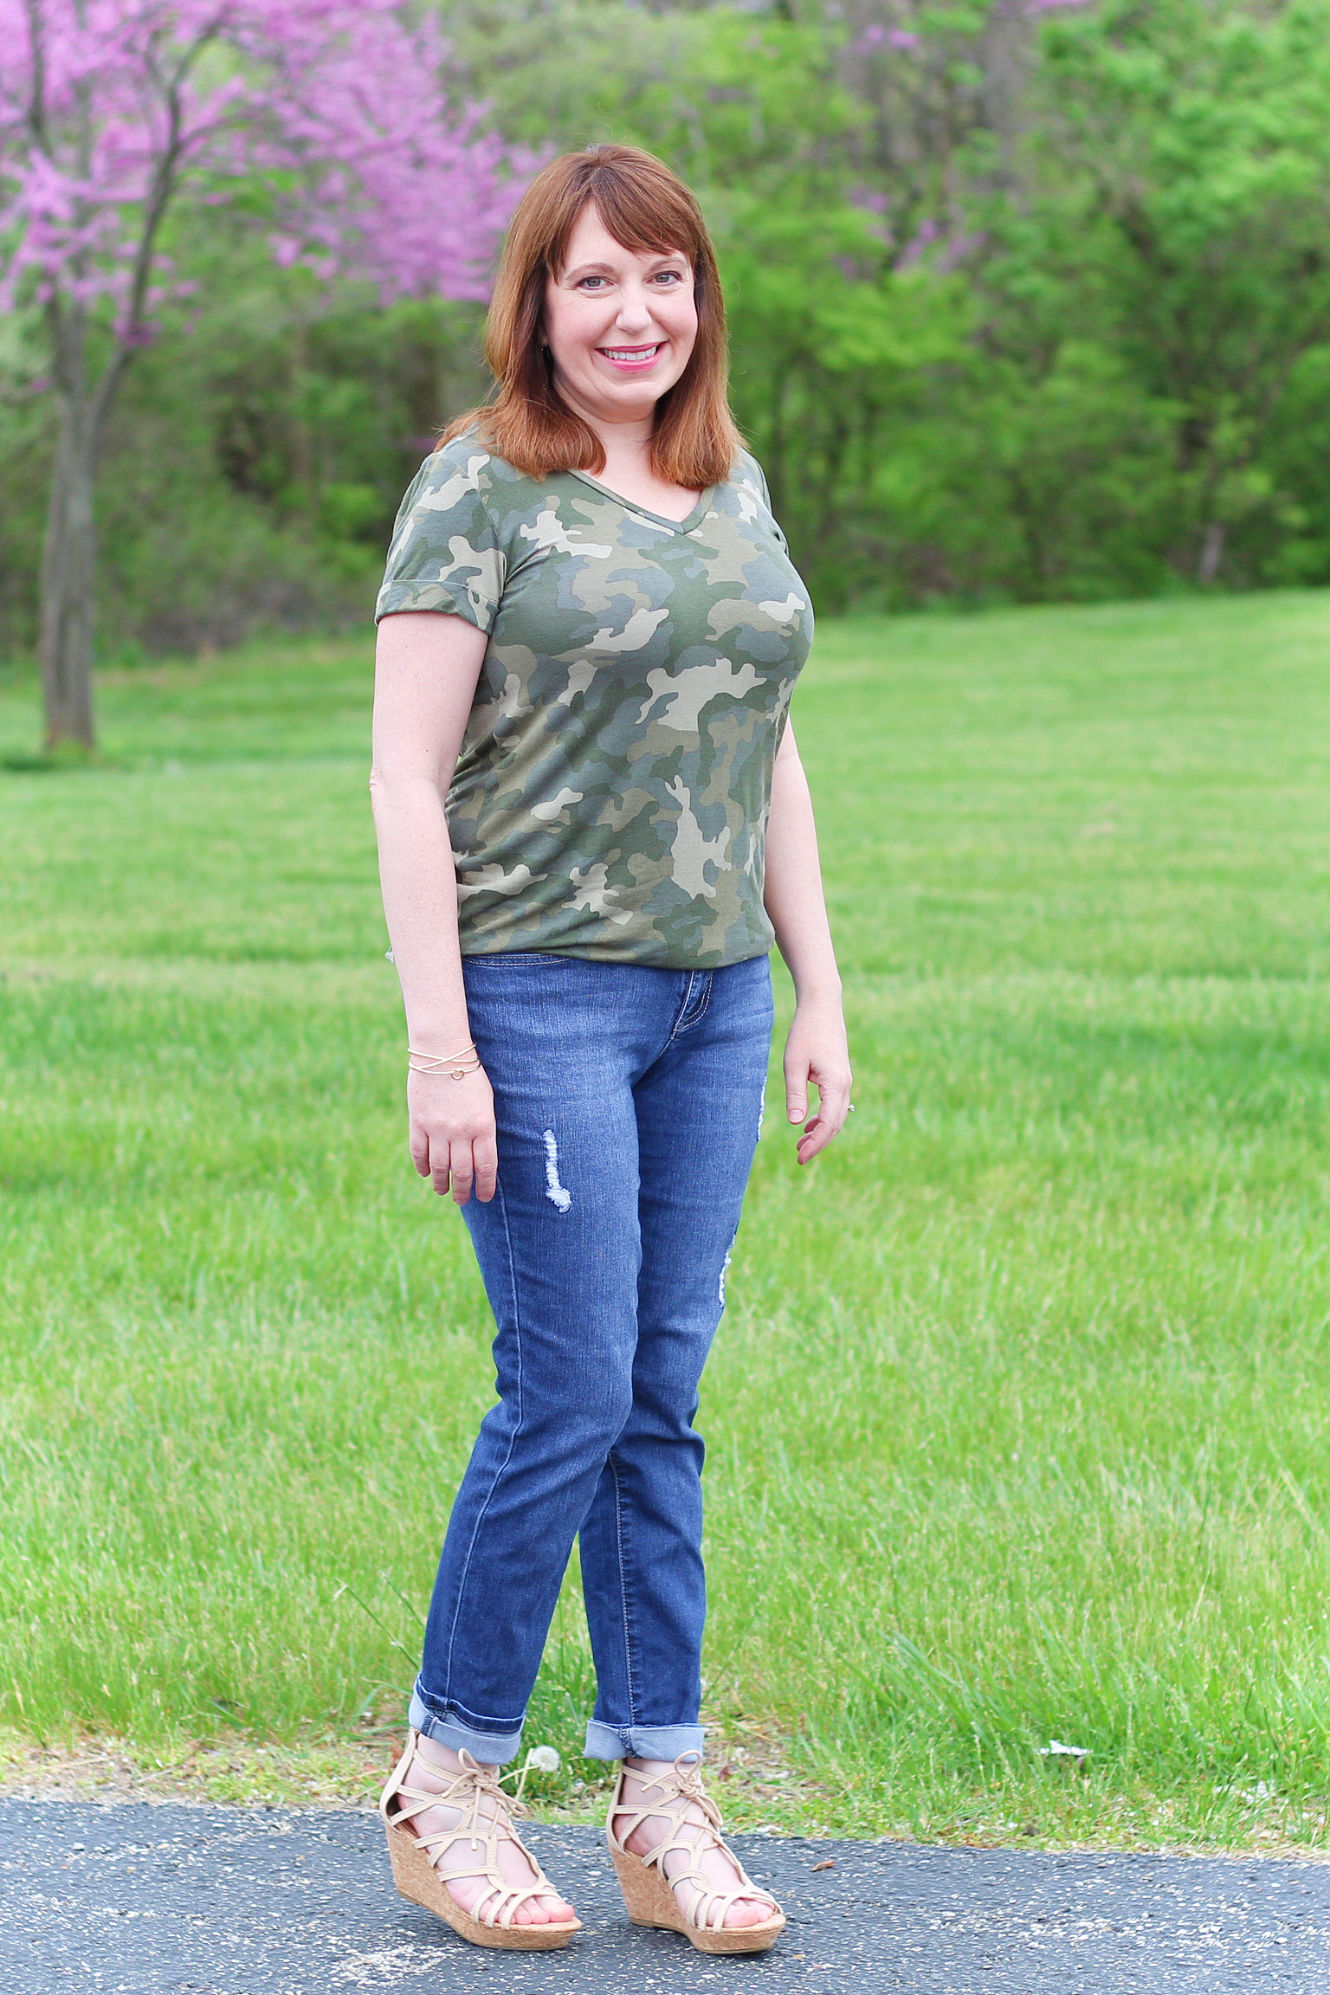 Camo Tee And Jeans Srping Outfit #fashion #style